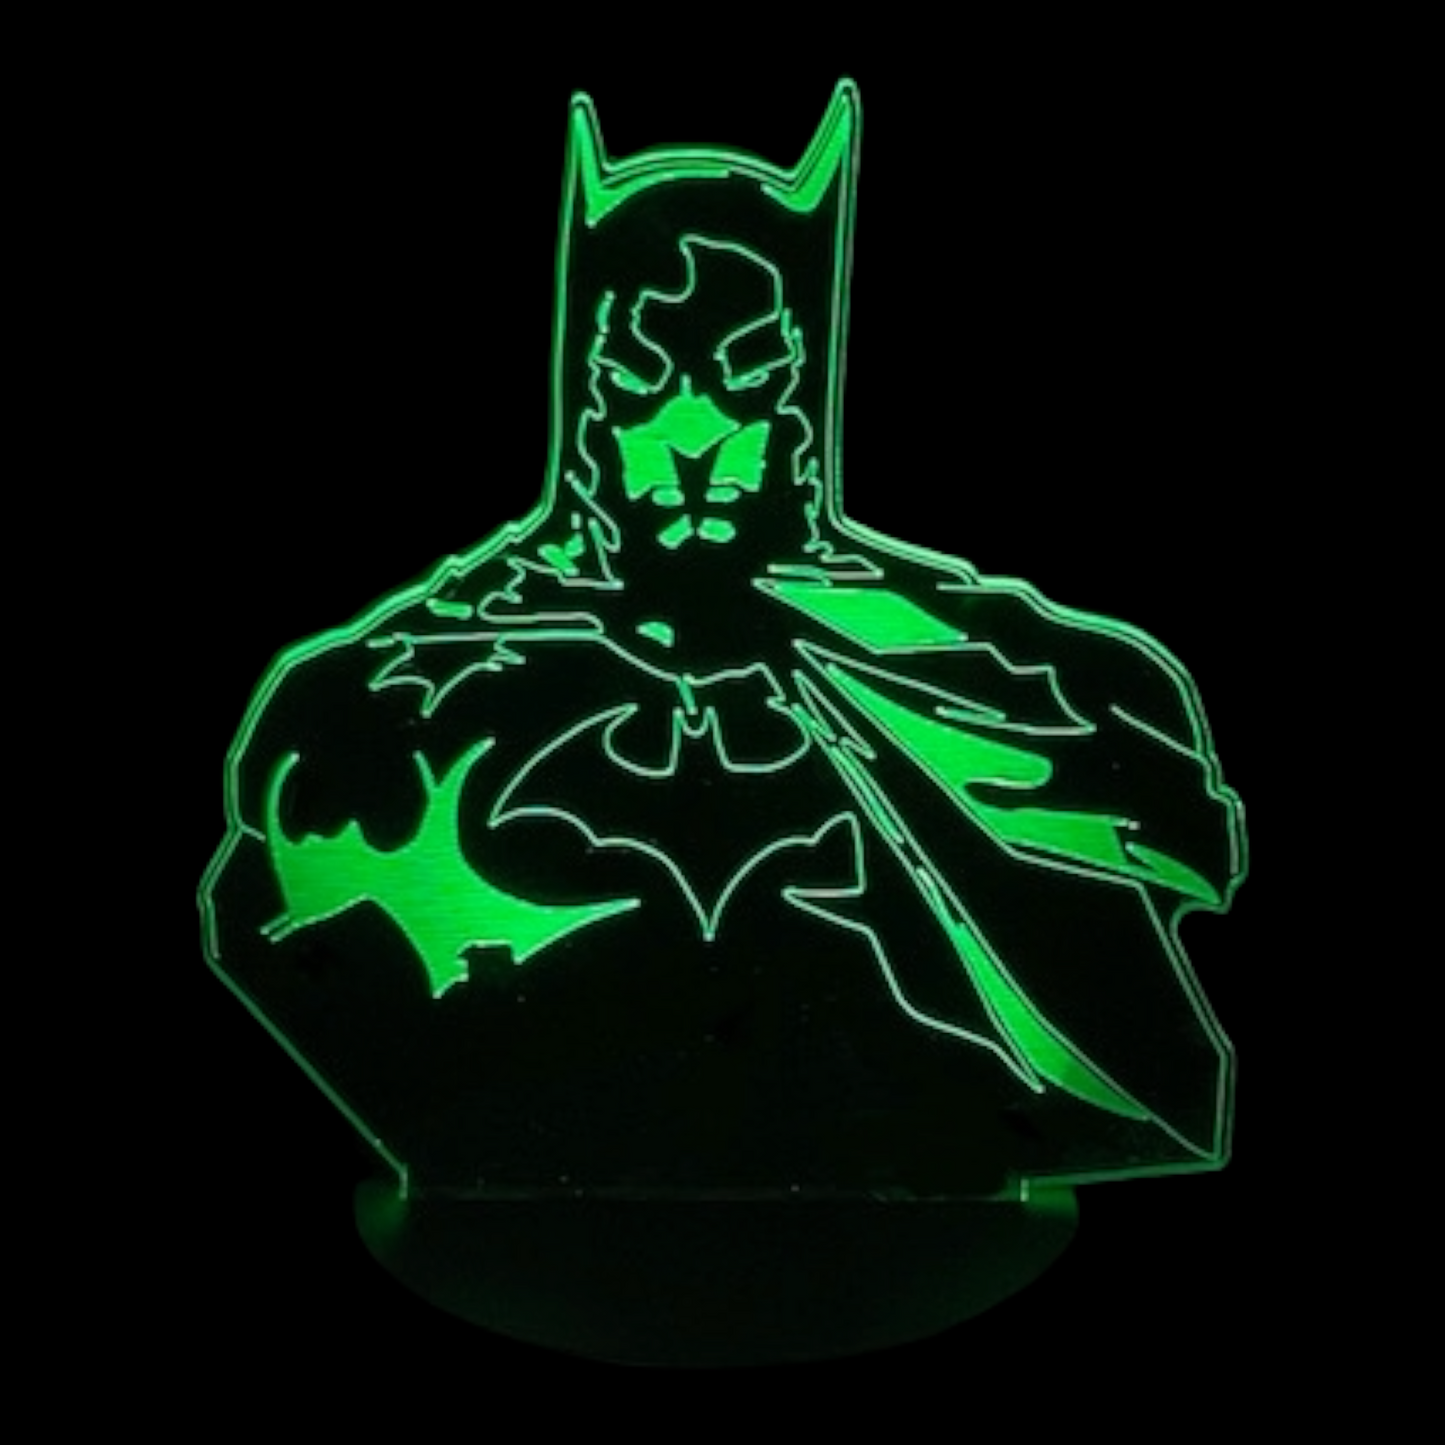 Batman 3D LED Night-Light 7 Color Changing Lamp w/ Touch Switch